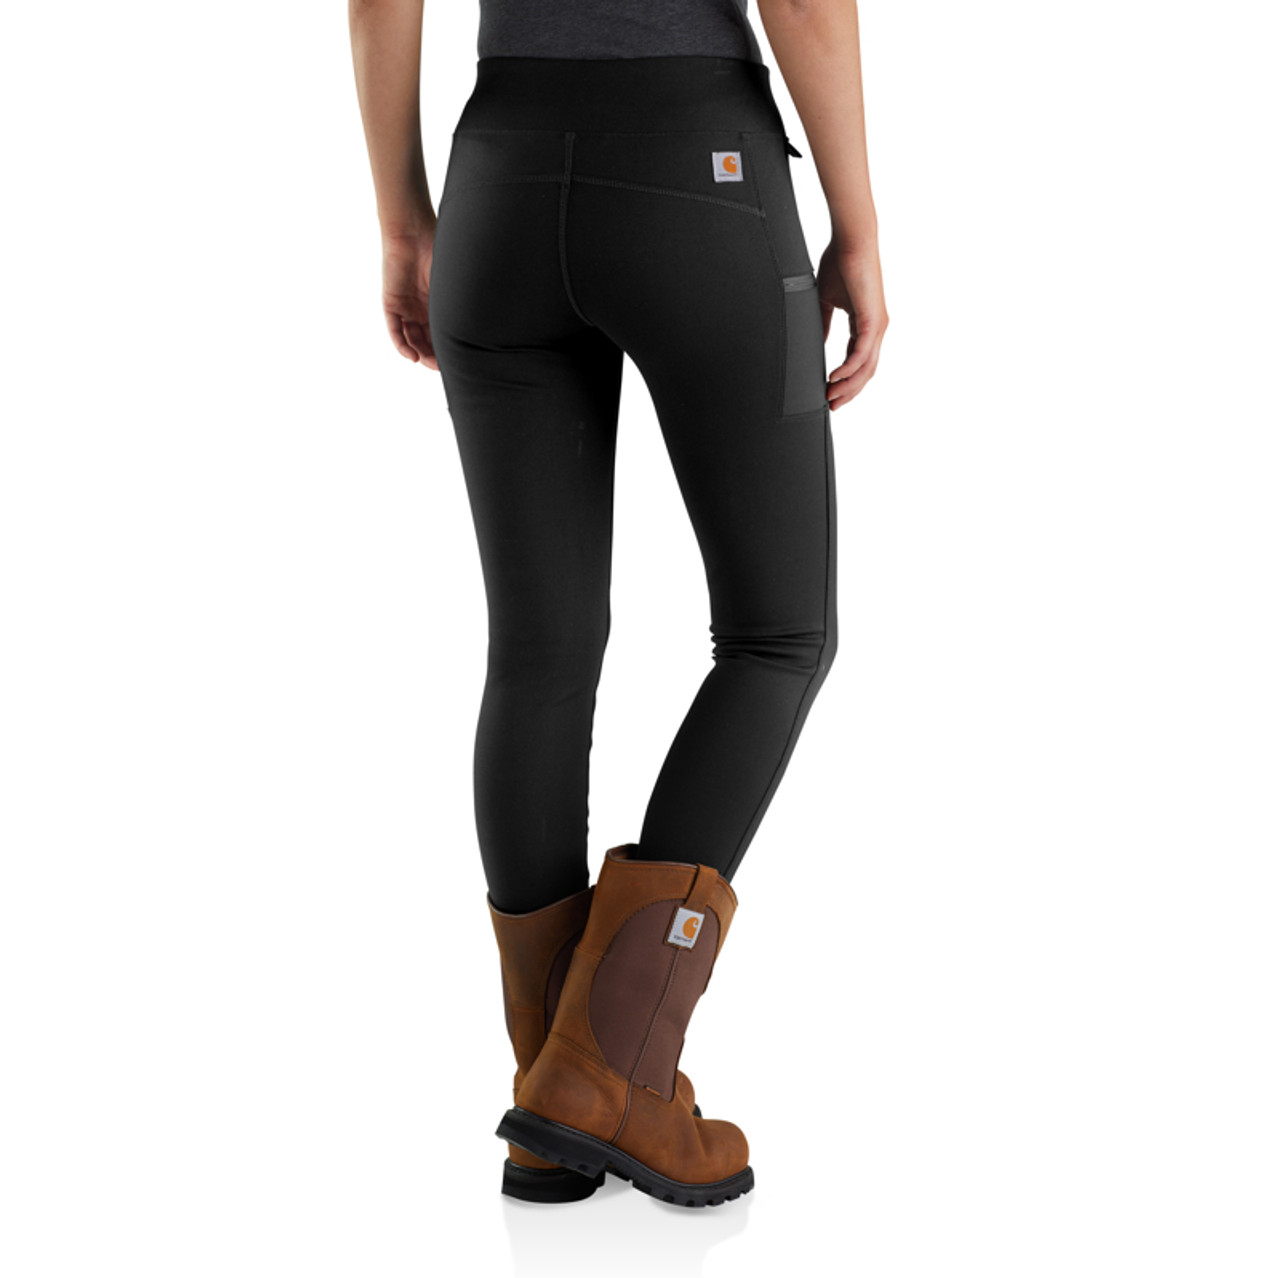 Carhartt Force Womens Fitted Lightweight Ankle Length Legging